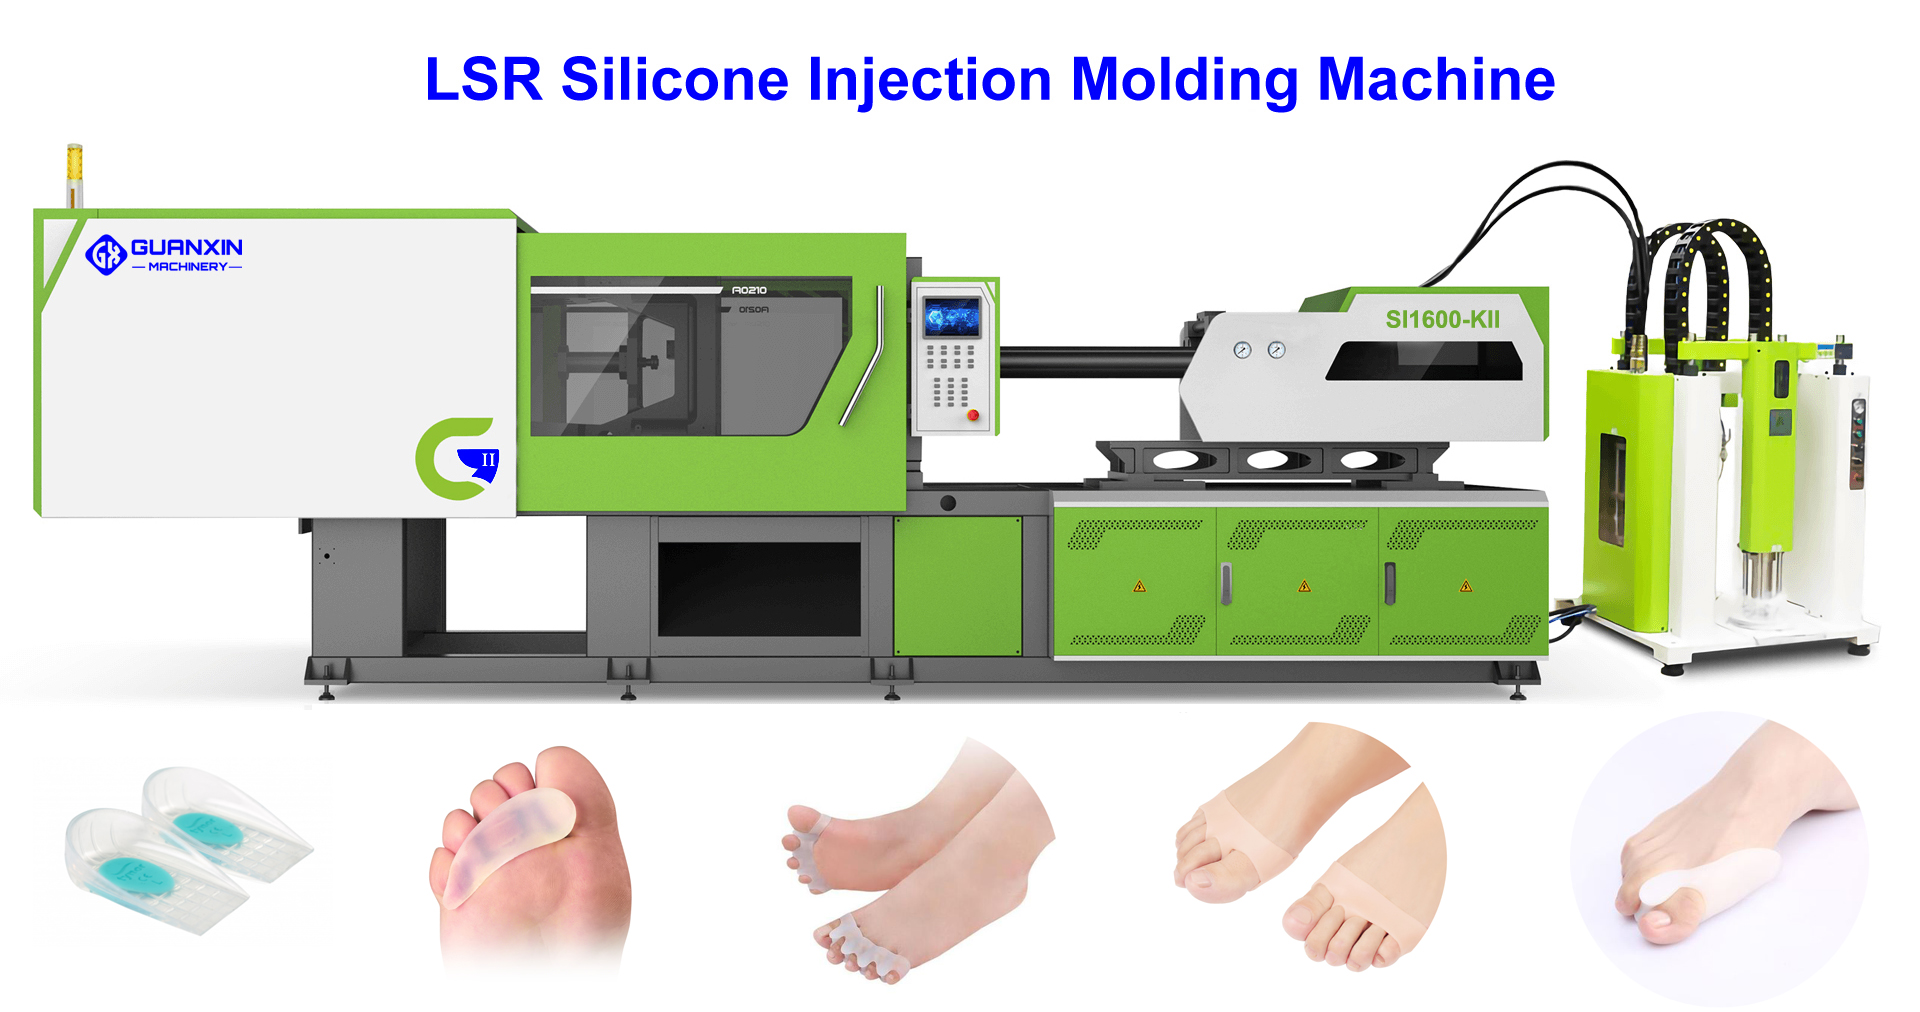 How Silicone Toe Protectors are Made by LSR injection molding machine